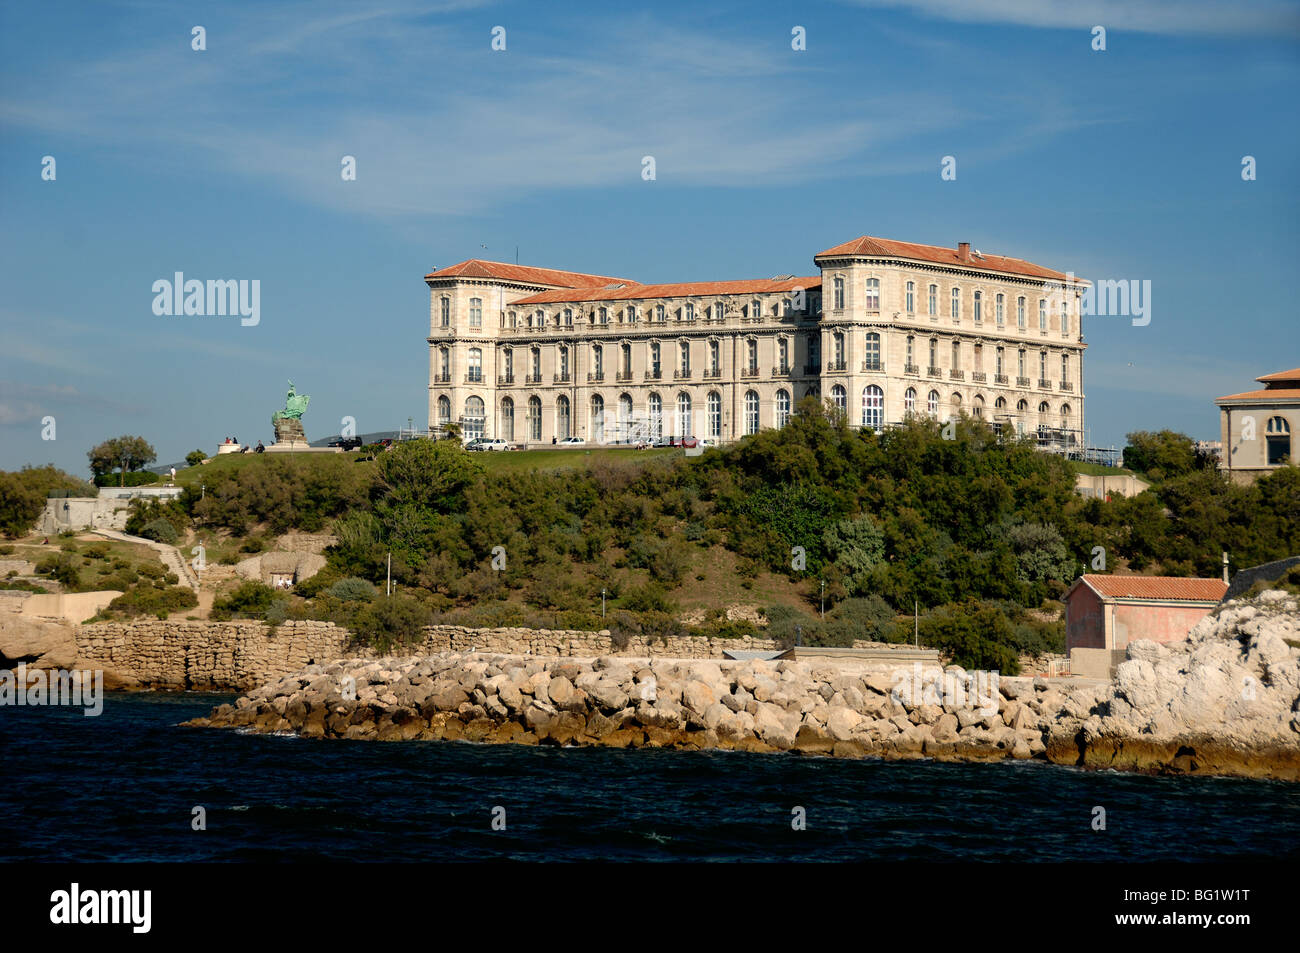 Palais du Pharo, or c19th Pharo Palace built by Napoléon III Overlooking the Old Port & Bay, Marseille or Marseilles, France Stock Photo